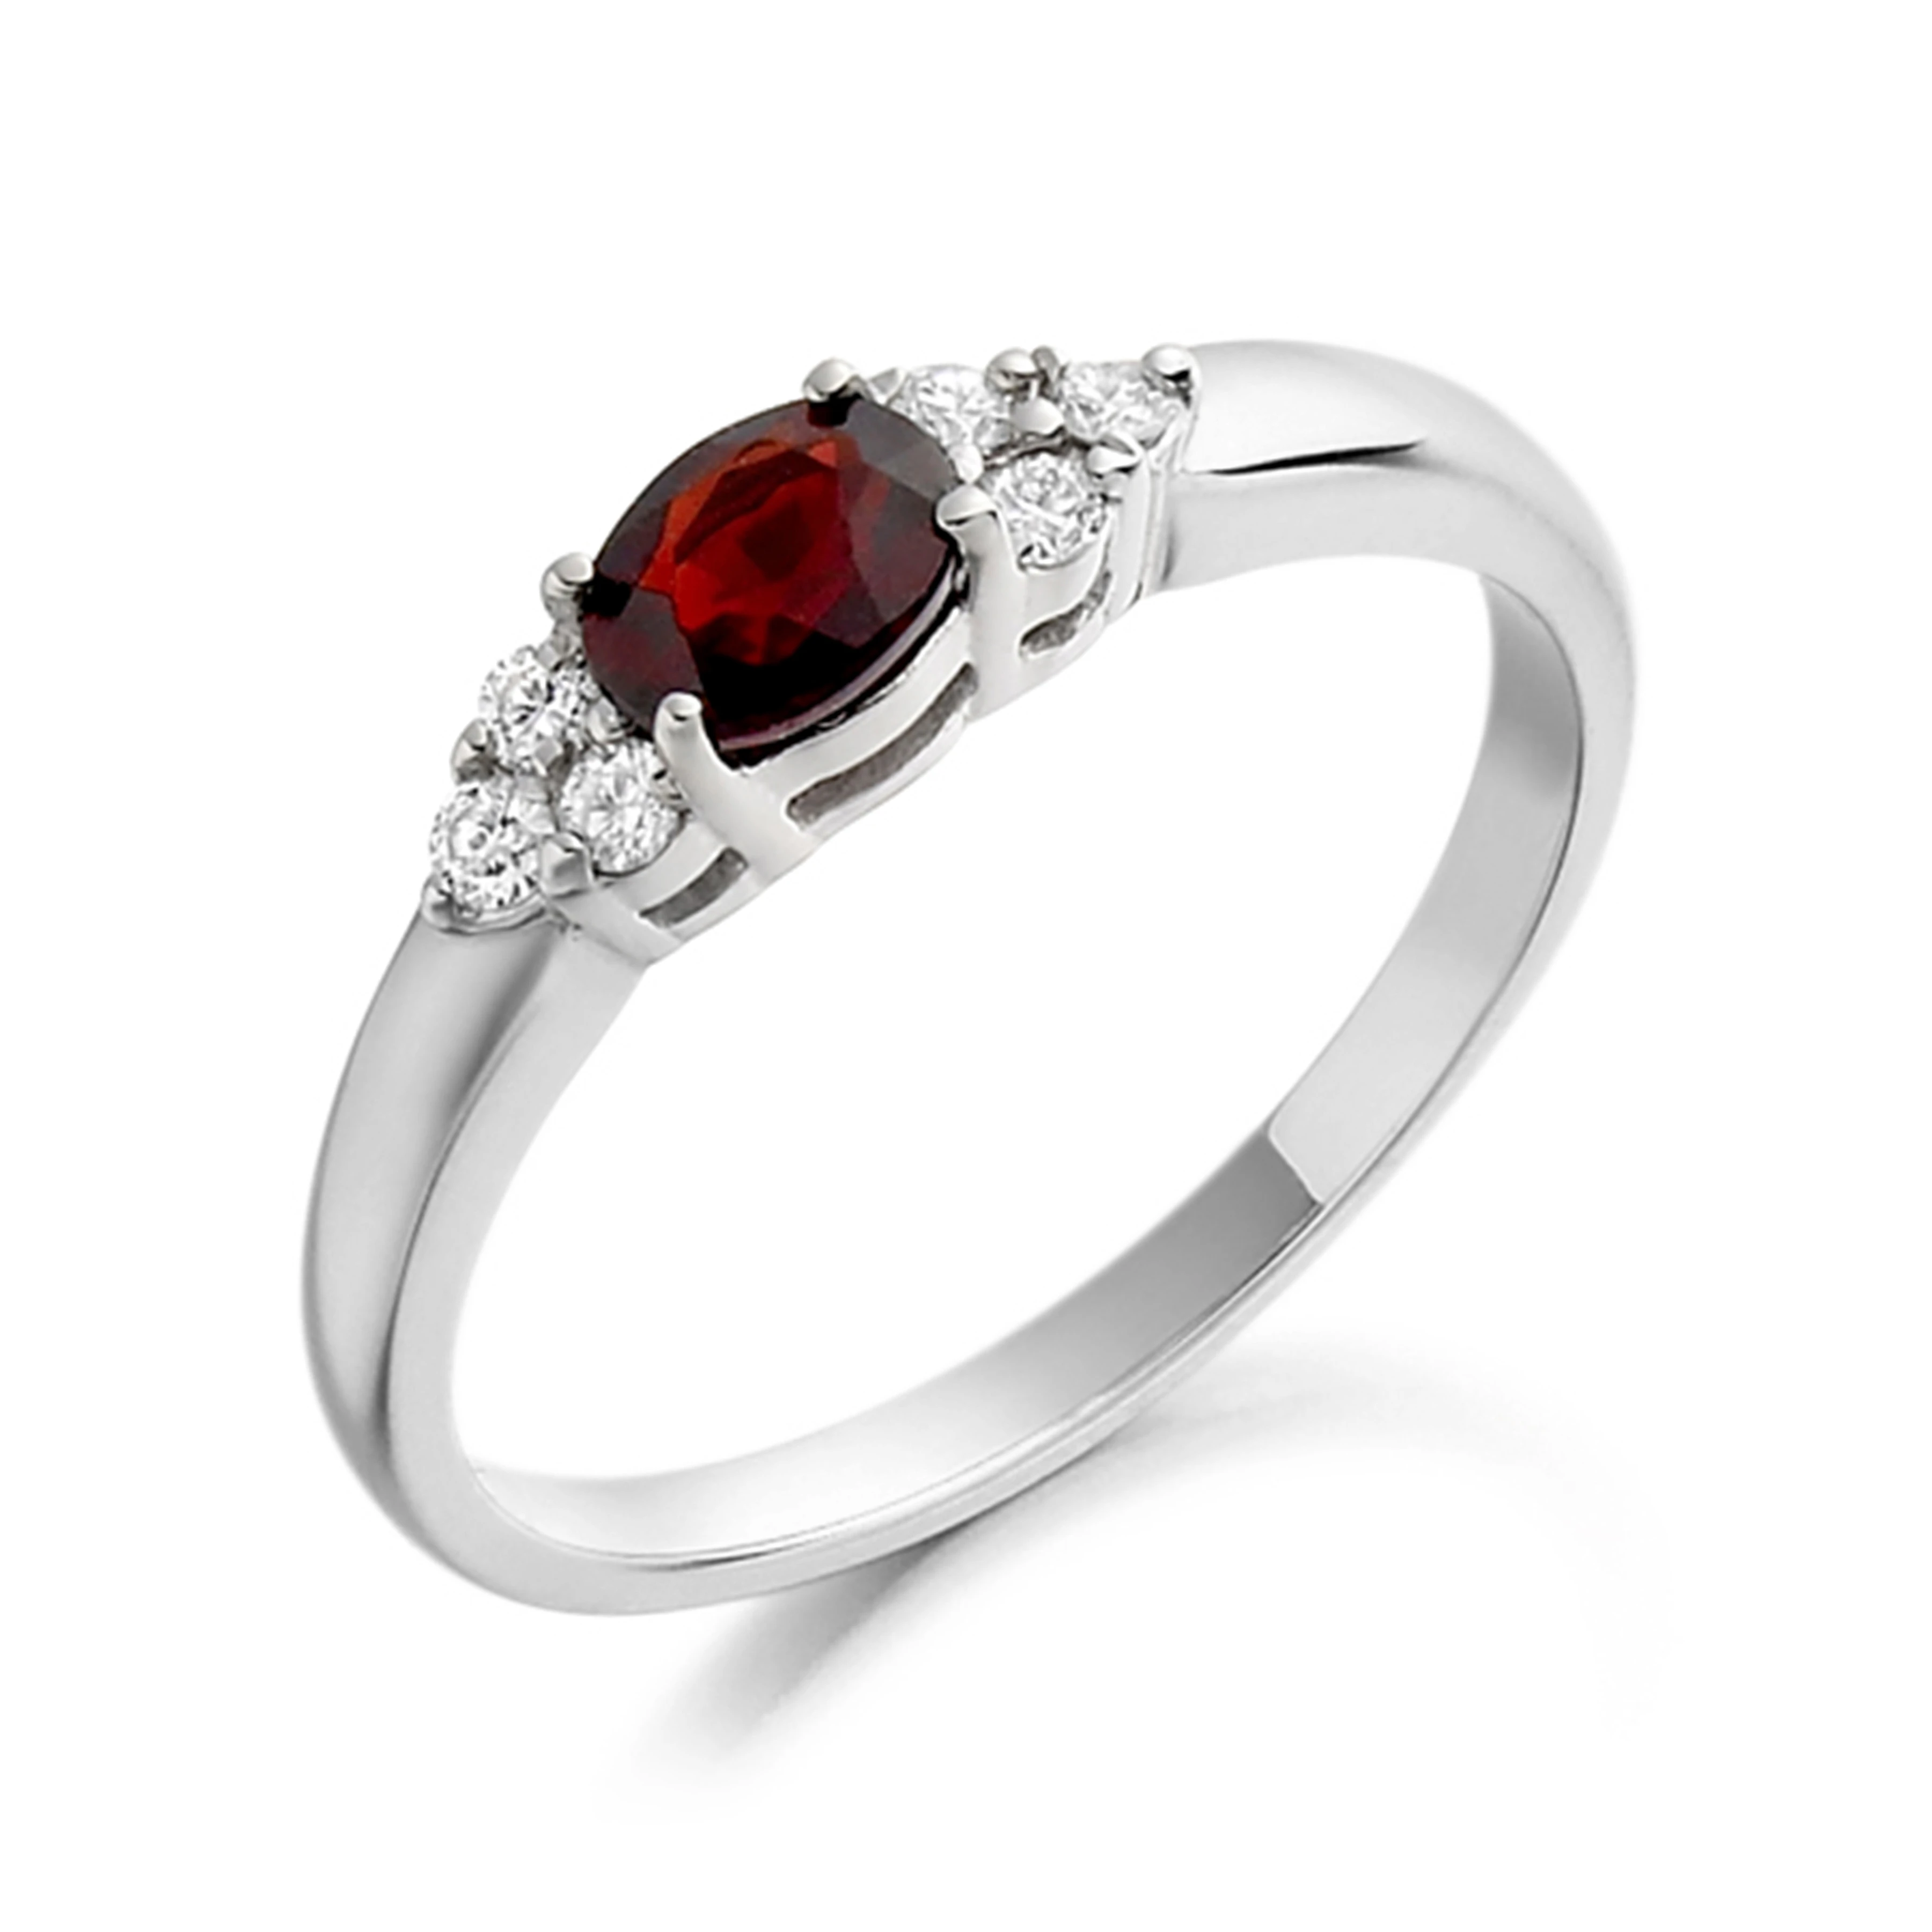 gemstone ring with oval shape garnet and side stone ring